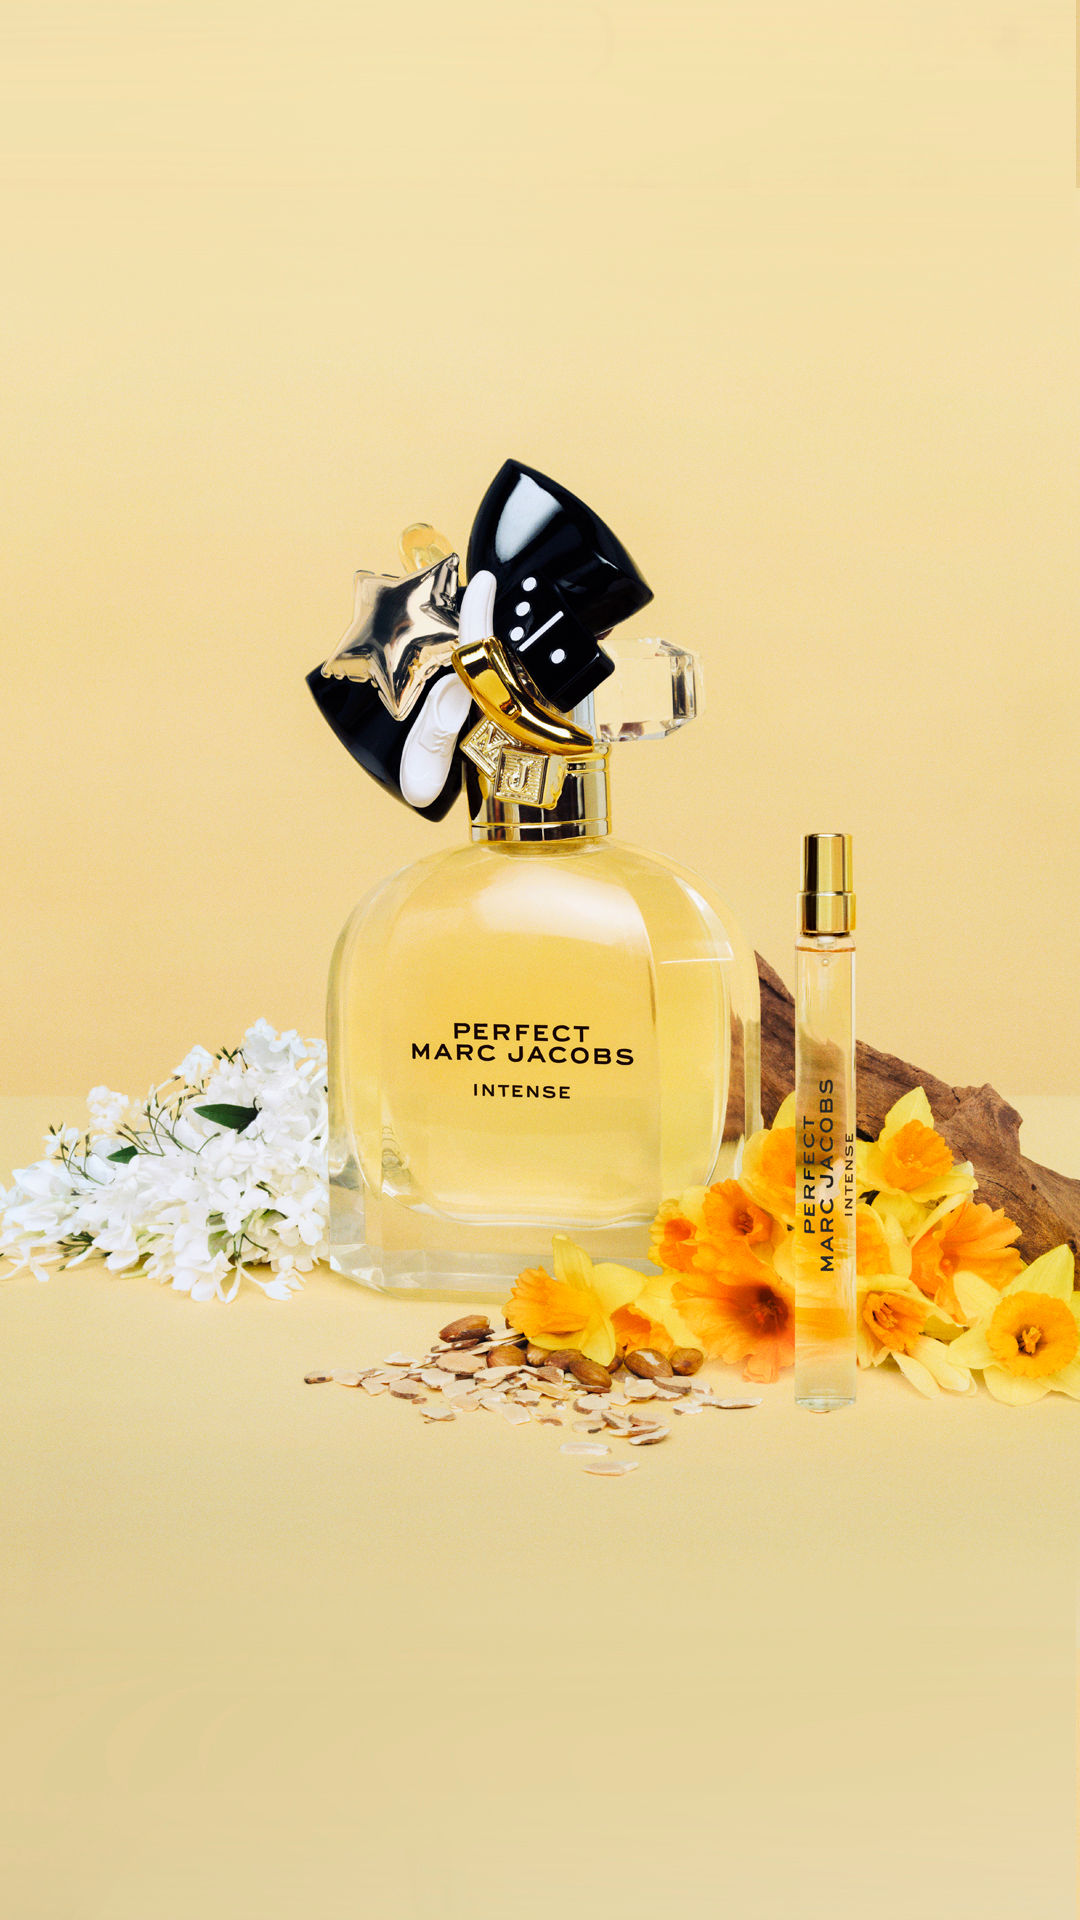 Find a new fragrance from December's delightful perfume offerings